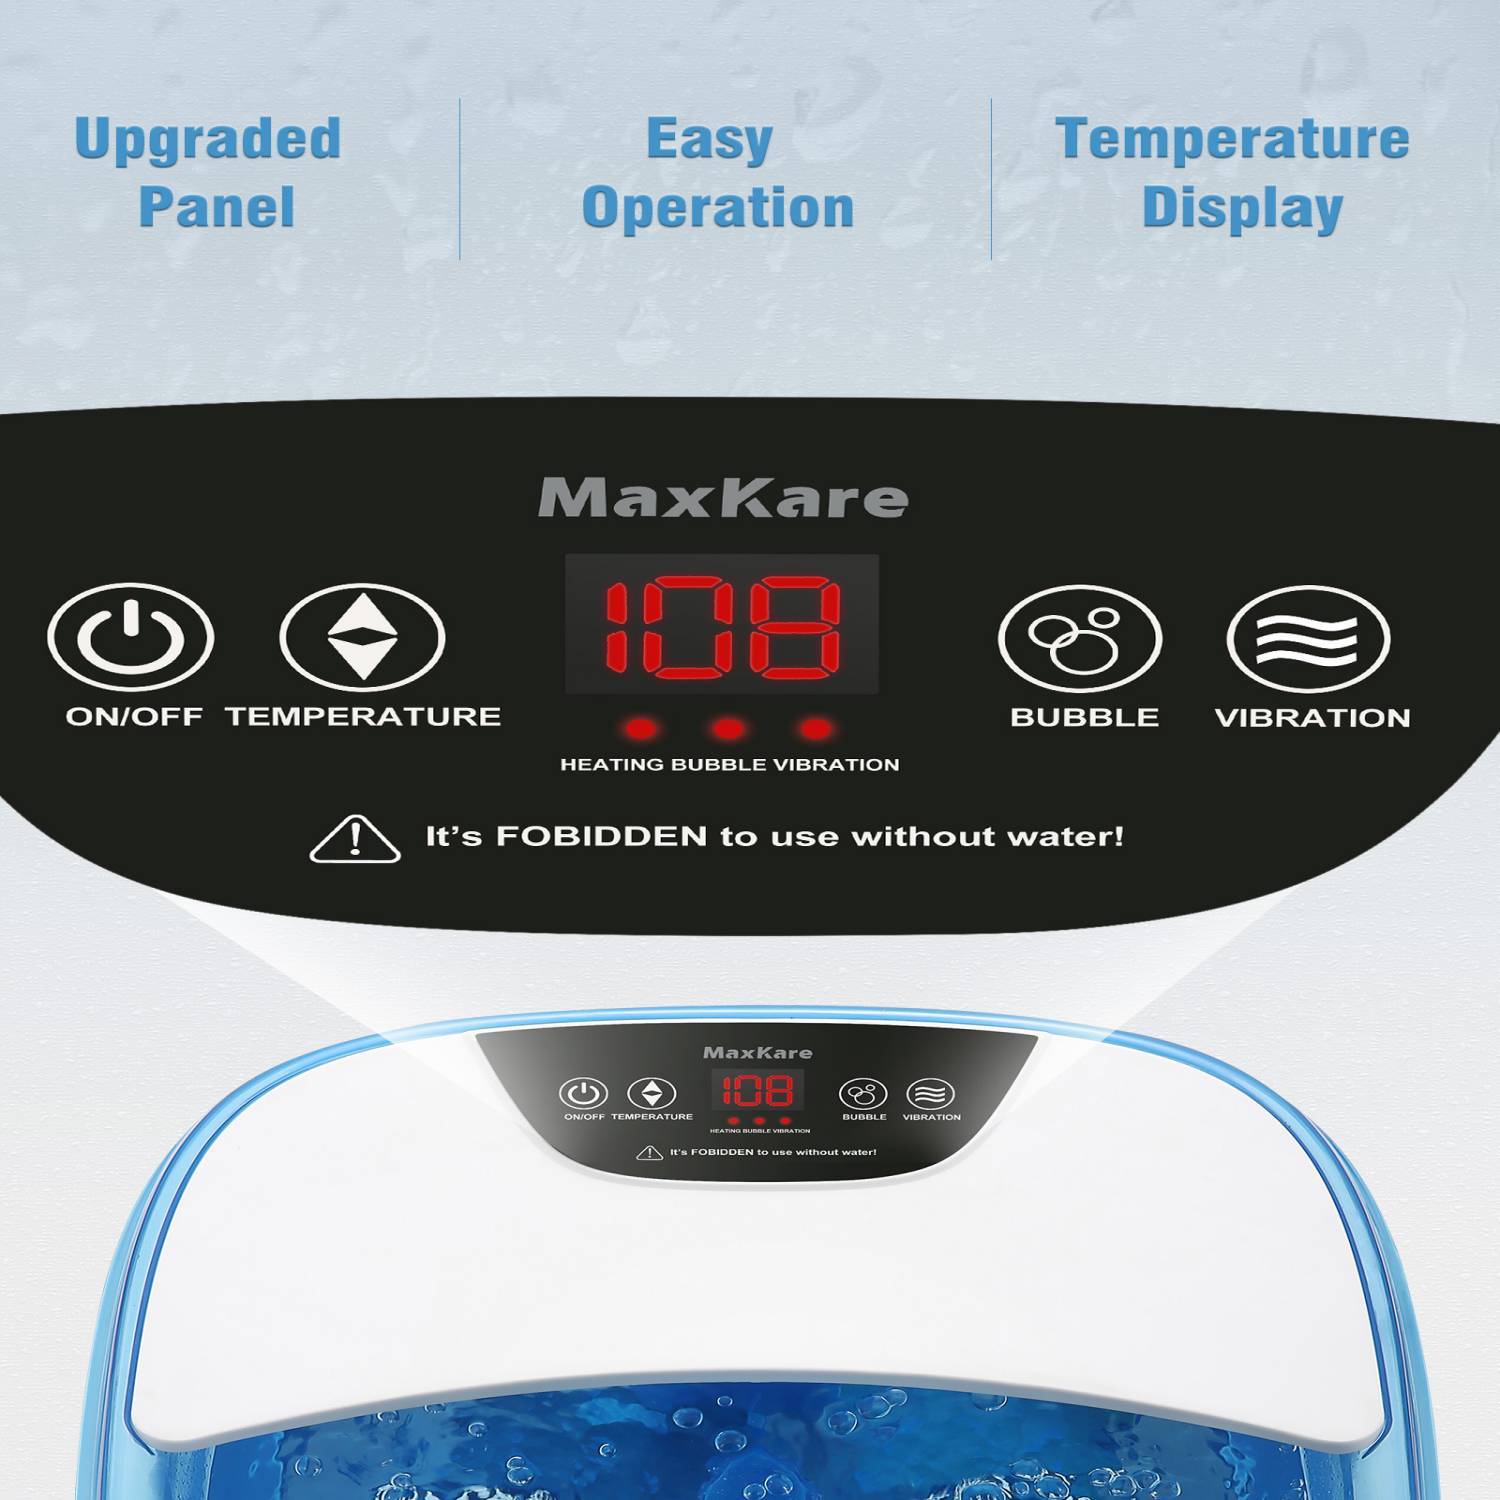 Load image into Gallery viewer, Foot Spa Bath Bucket Massager with Heat Bubbles, Grinding Stone, with 4 Masssaging Rollers, Digital Temperature Control, Pedicure Foot Soak Relax leg muscles, Comfort Feet Help Sleep Home Use - NAIPO
